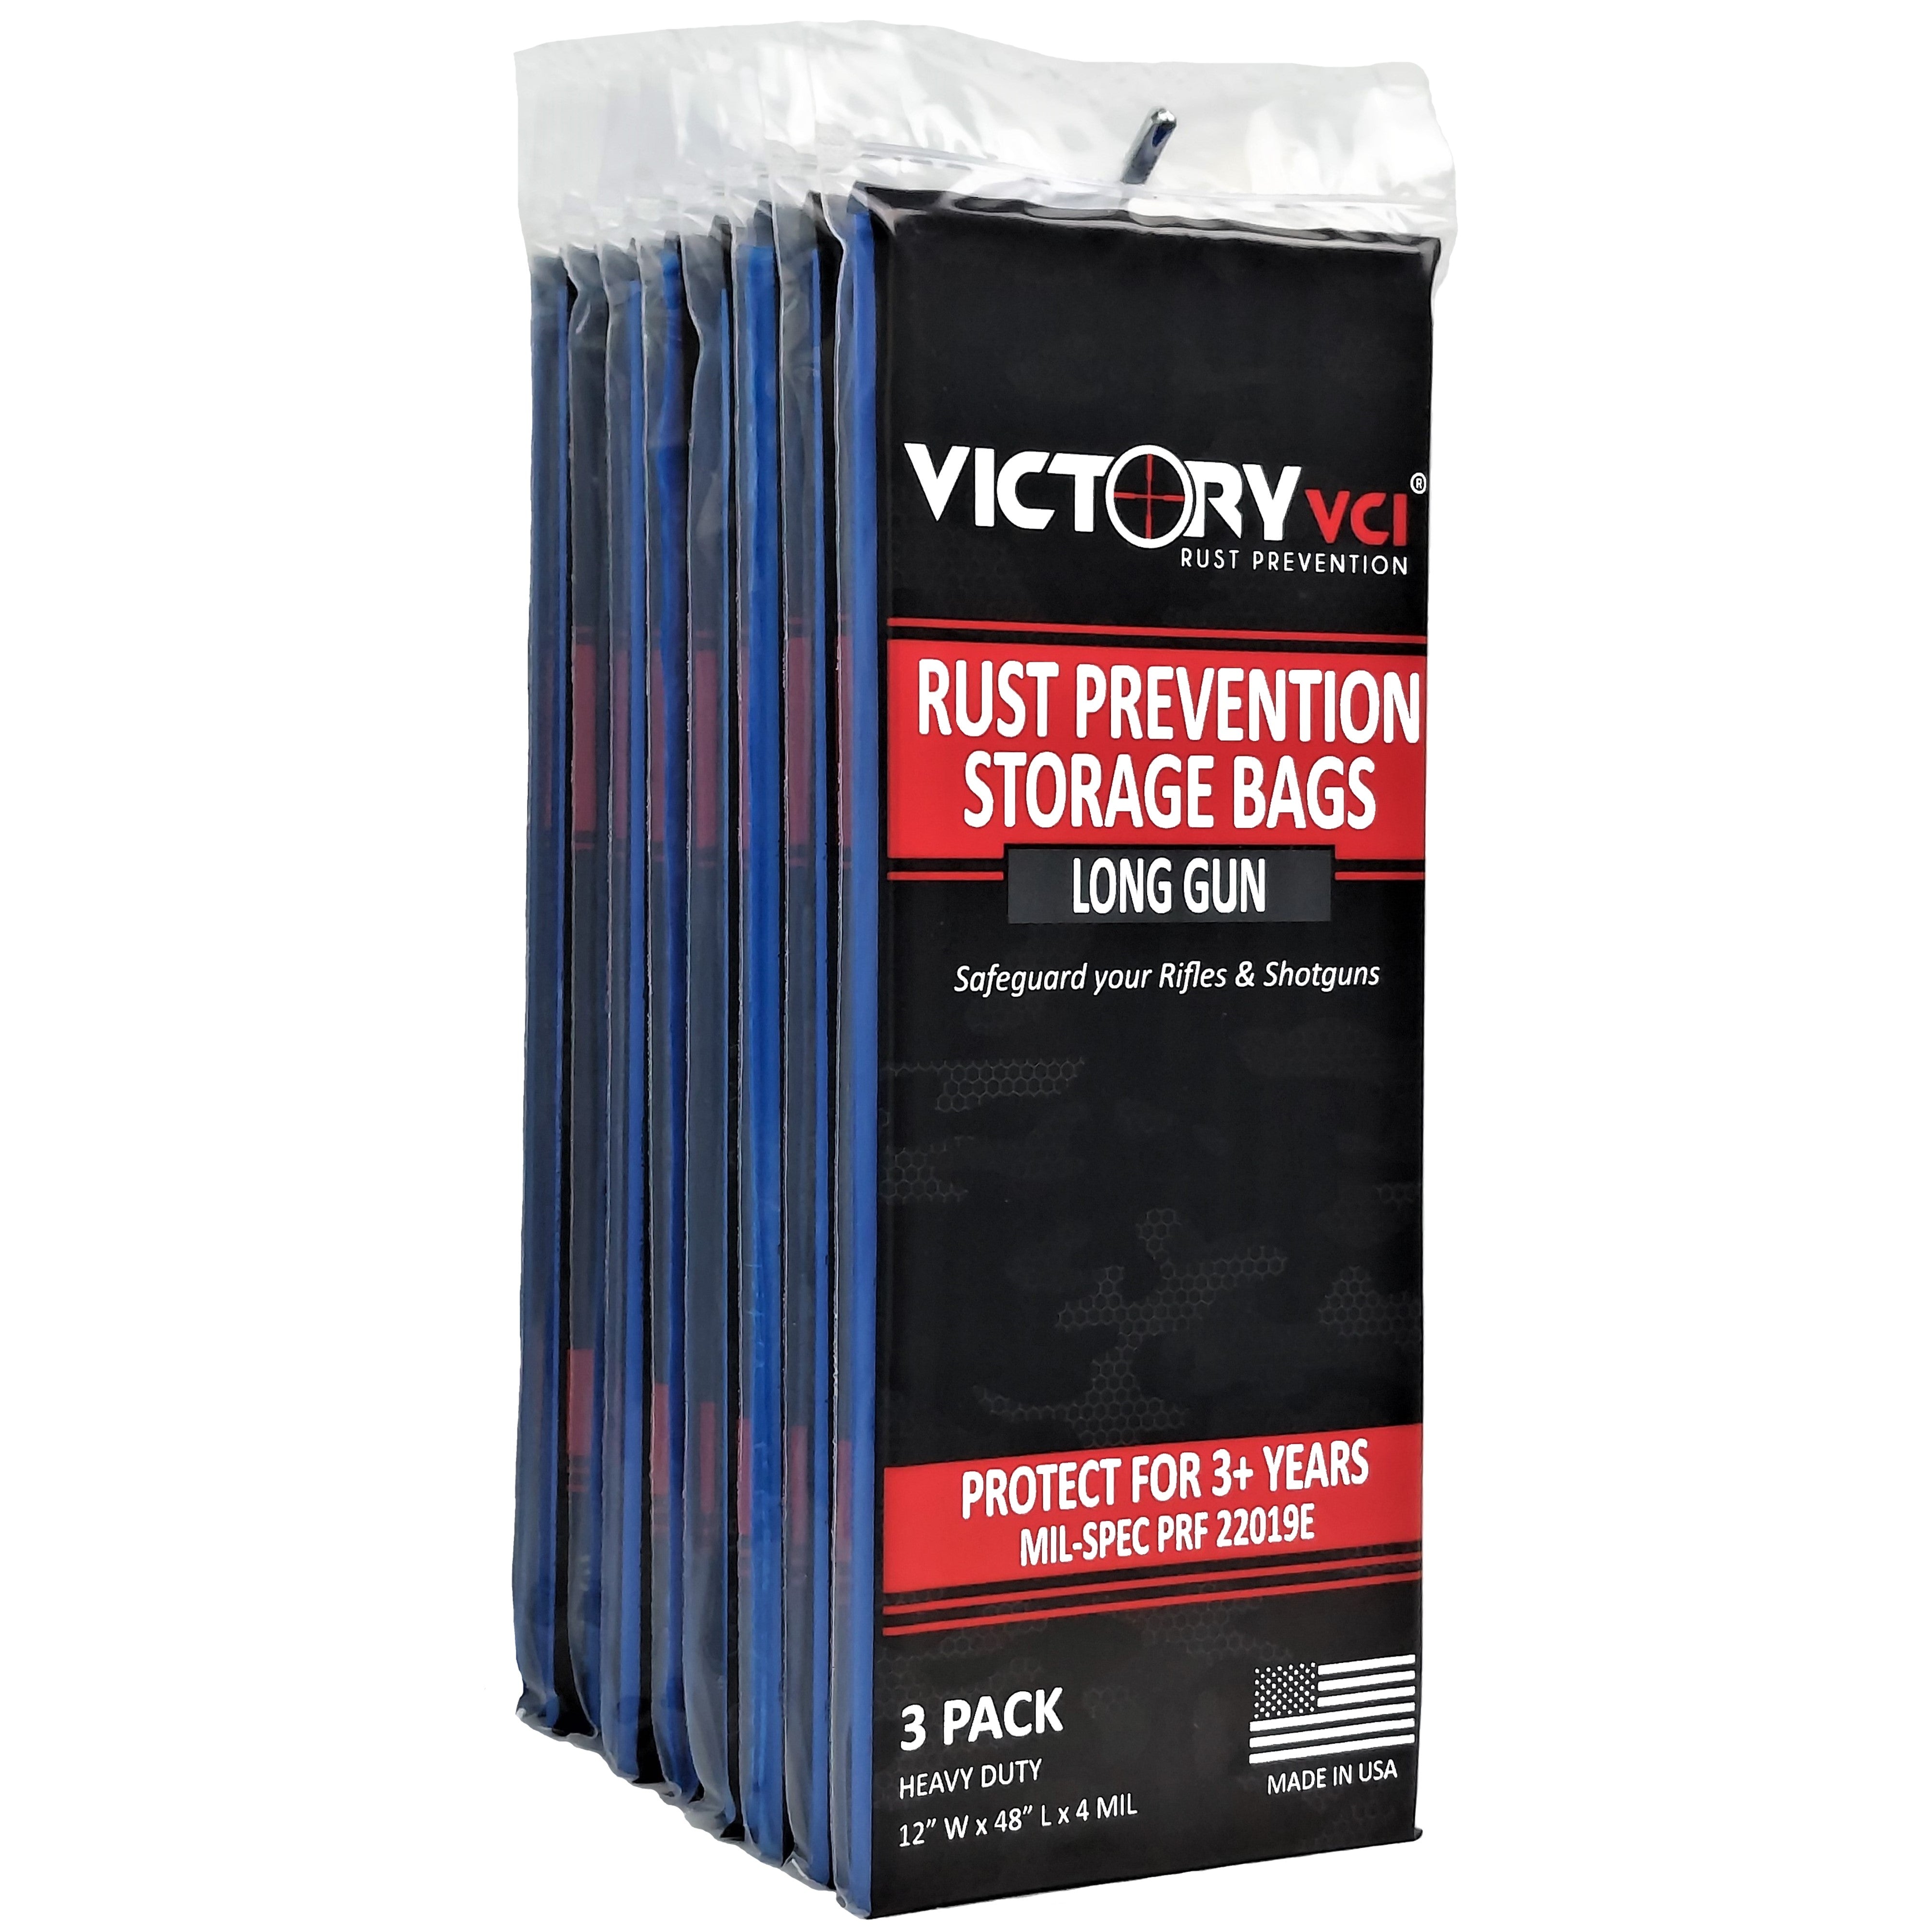 Gun Storage Bags | Victory VCI Rust Prevention